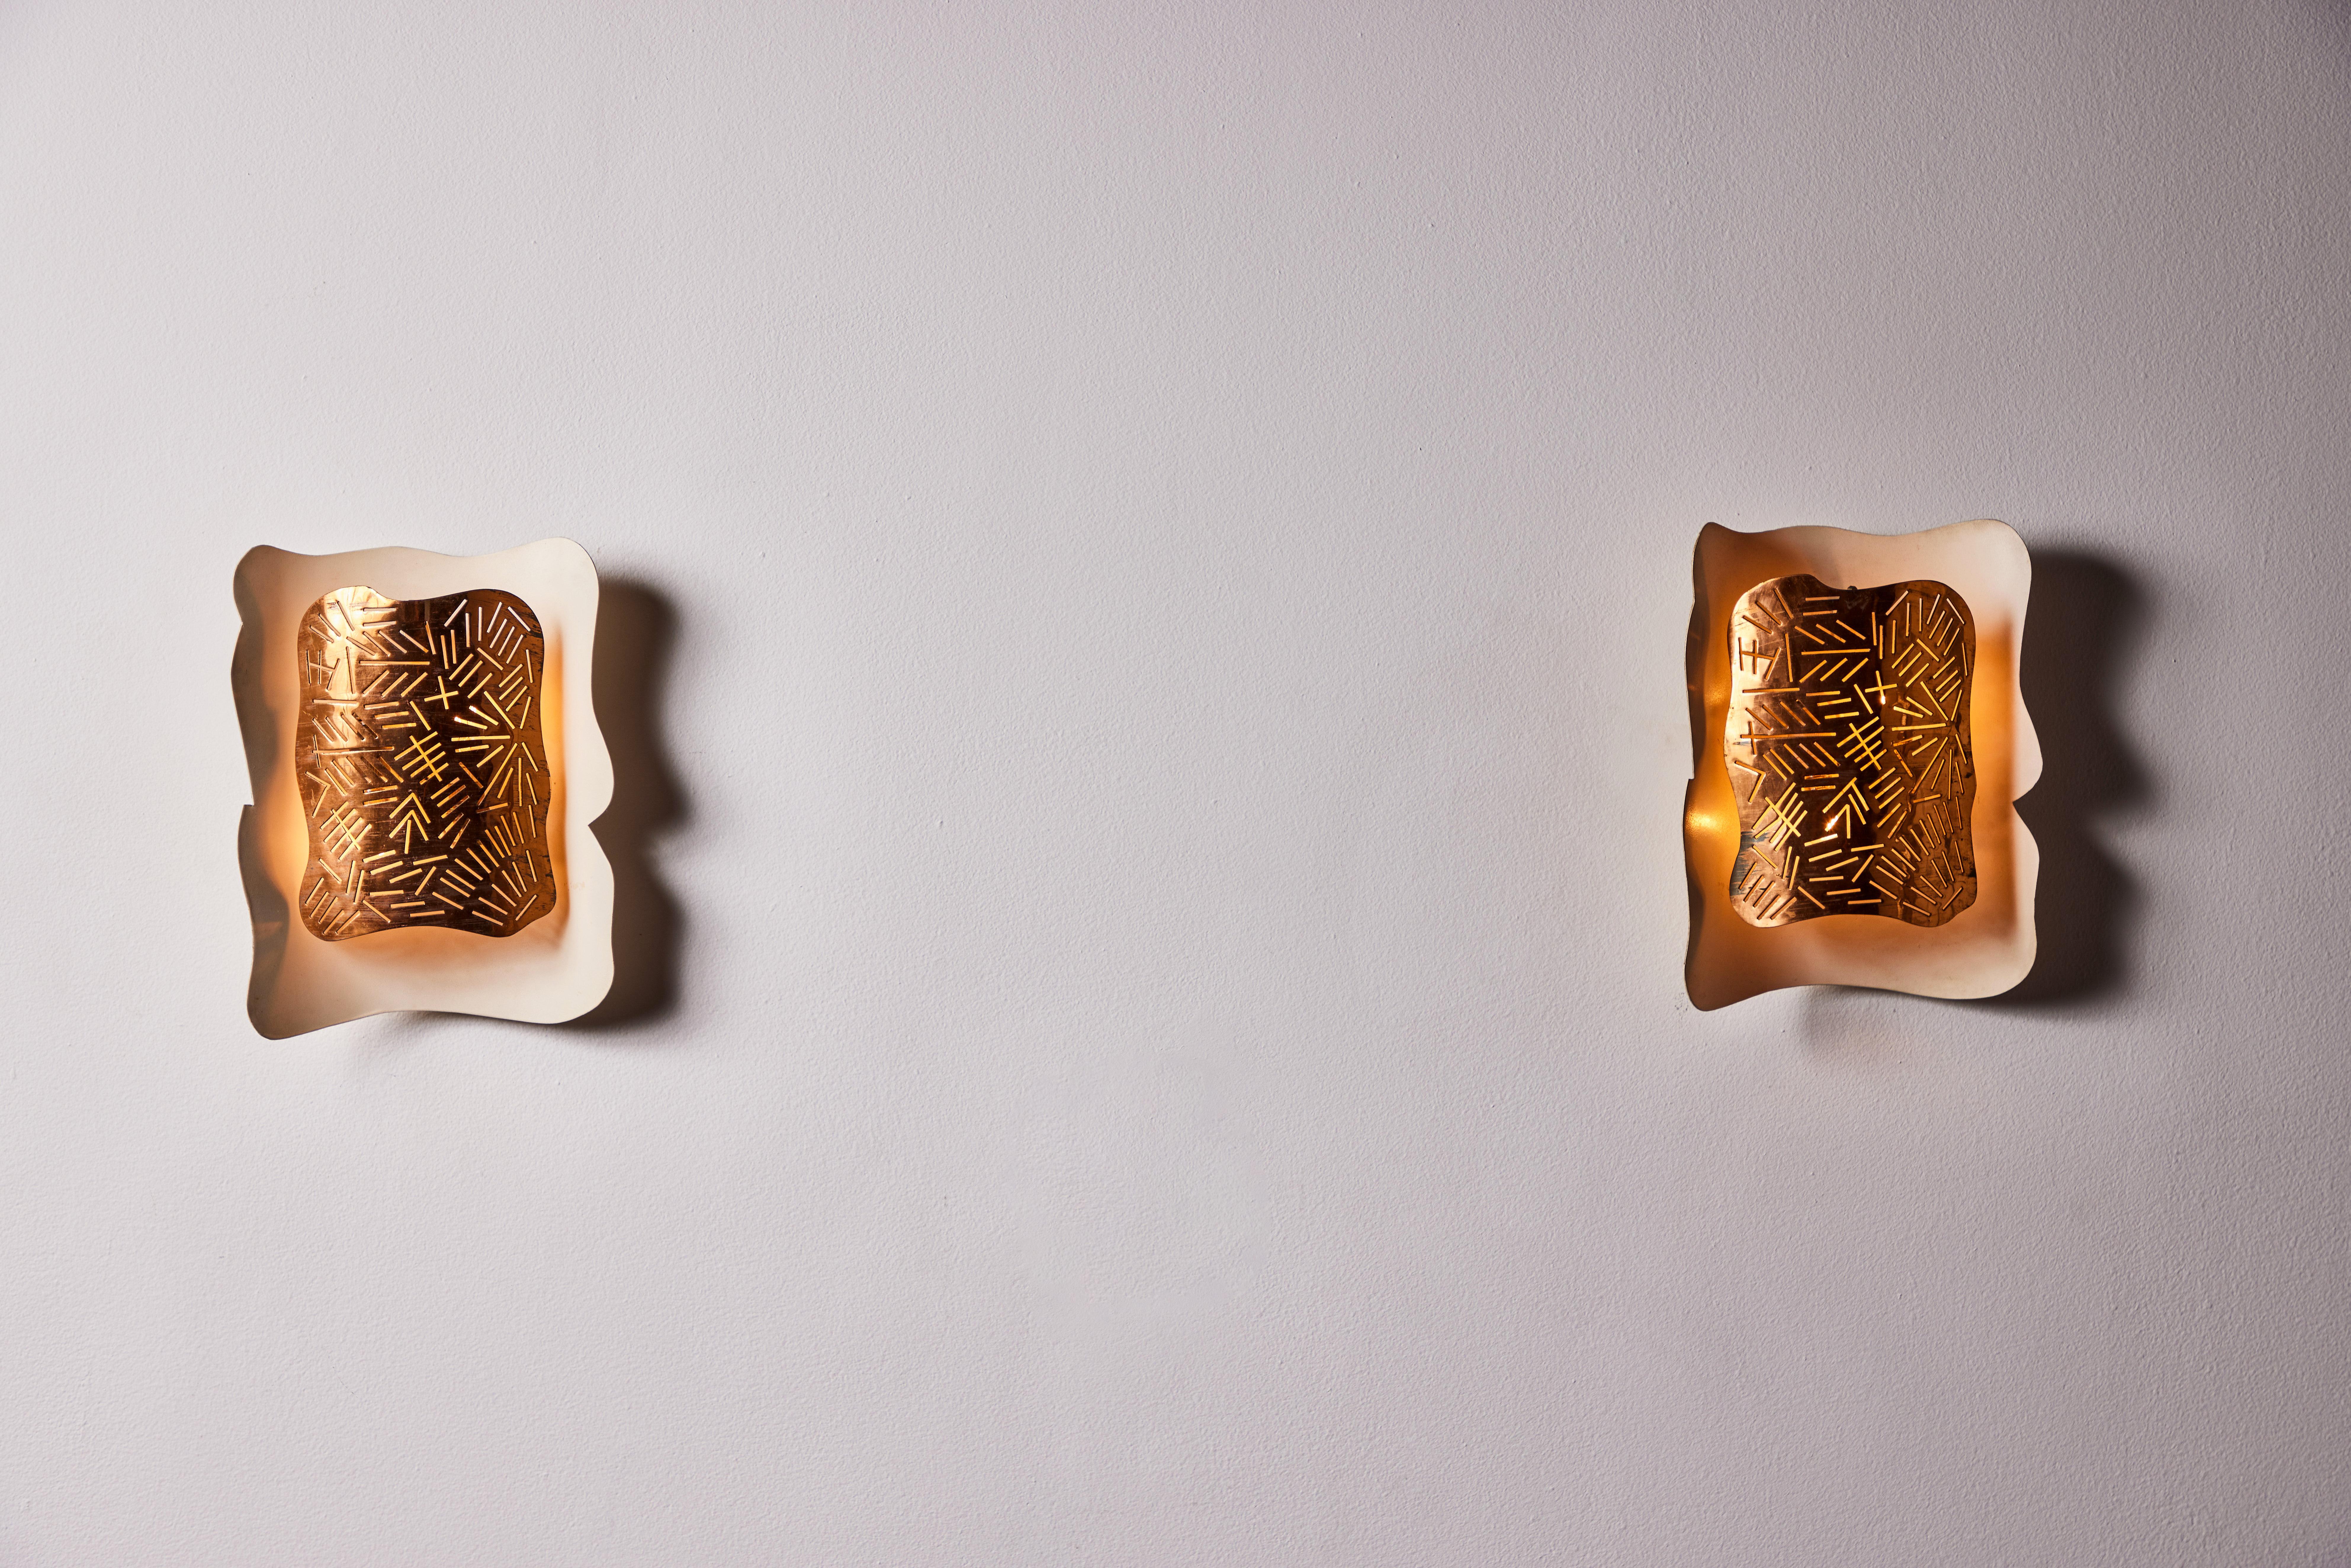 Pair of futurist sconces. Designed and manufactured in Italy, circa 1940s. Copper, enameled aluminum. Rewired for U.S. standards, no US backplate.  We recommend 2 E12 25w maximum bulbs per fixture. Bulbs provided as a onetime courtesy.